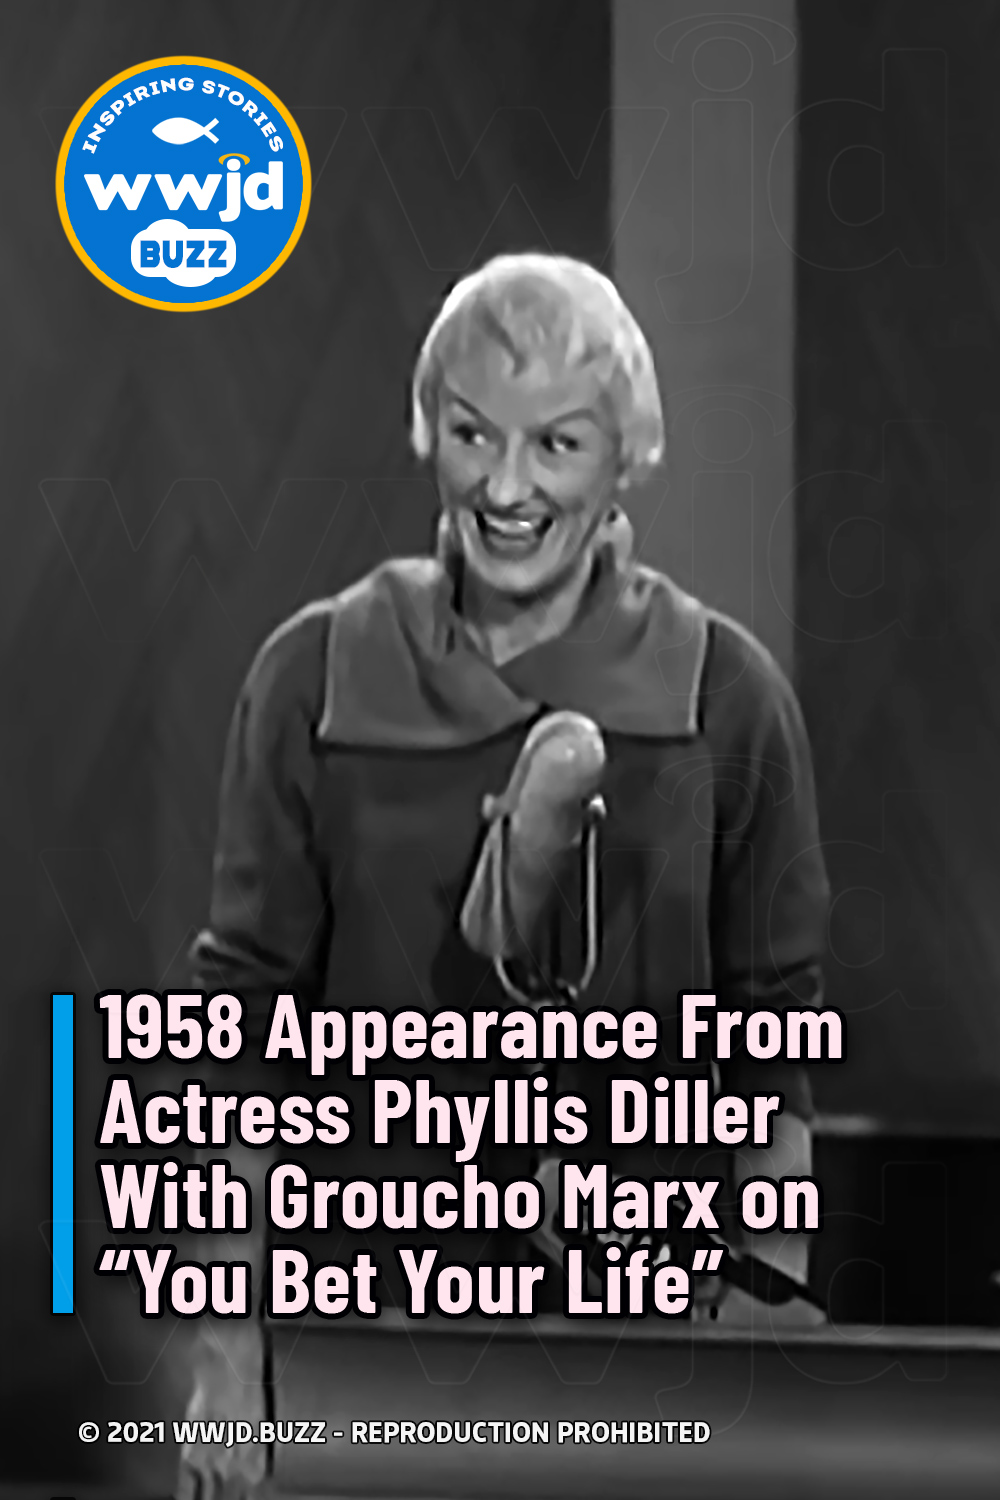 1958 Appearance From Actress Phyllis Diller With Groucho Marx on “You Bet Your Life”